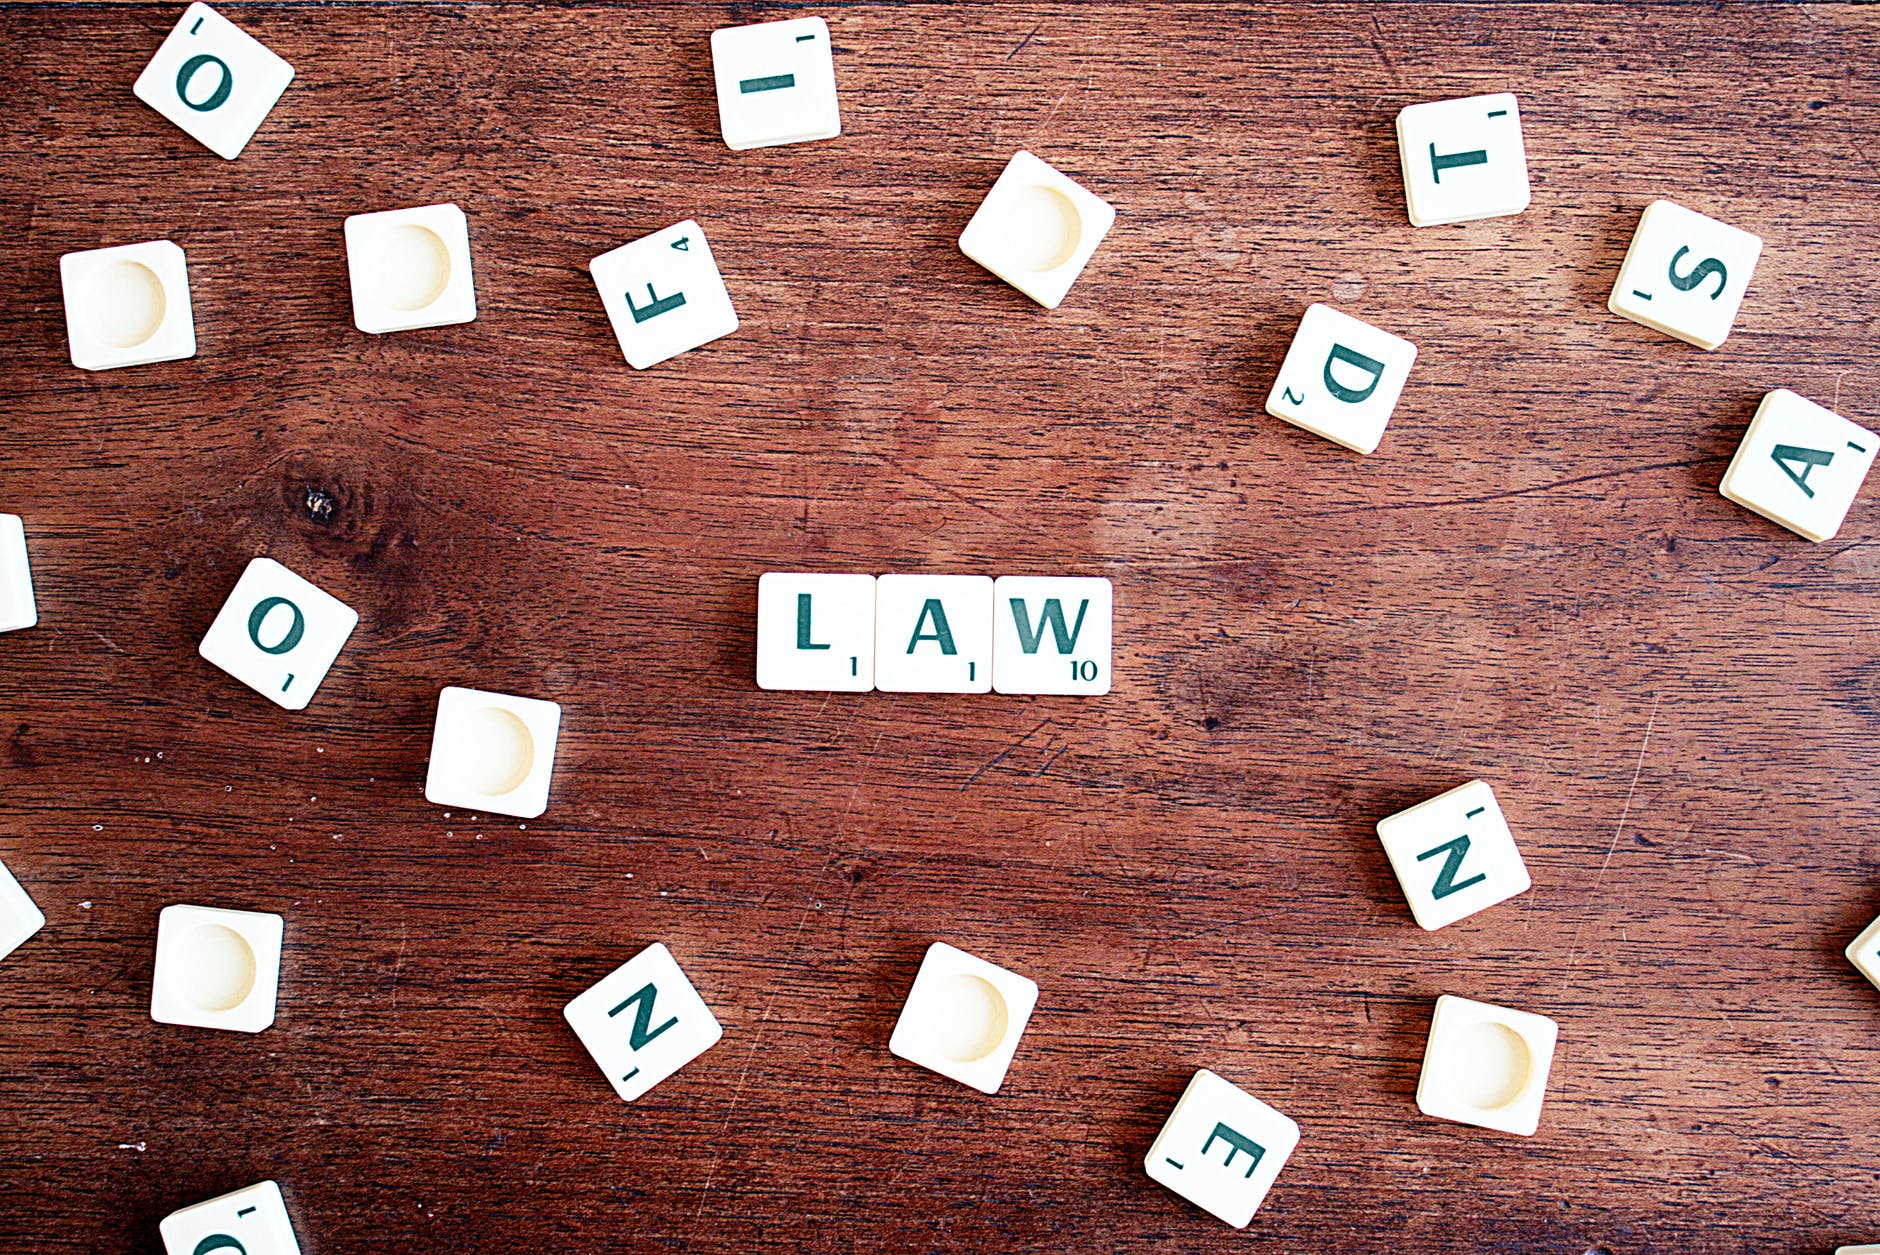 Scrabble letters making up "Law"